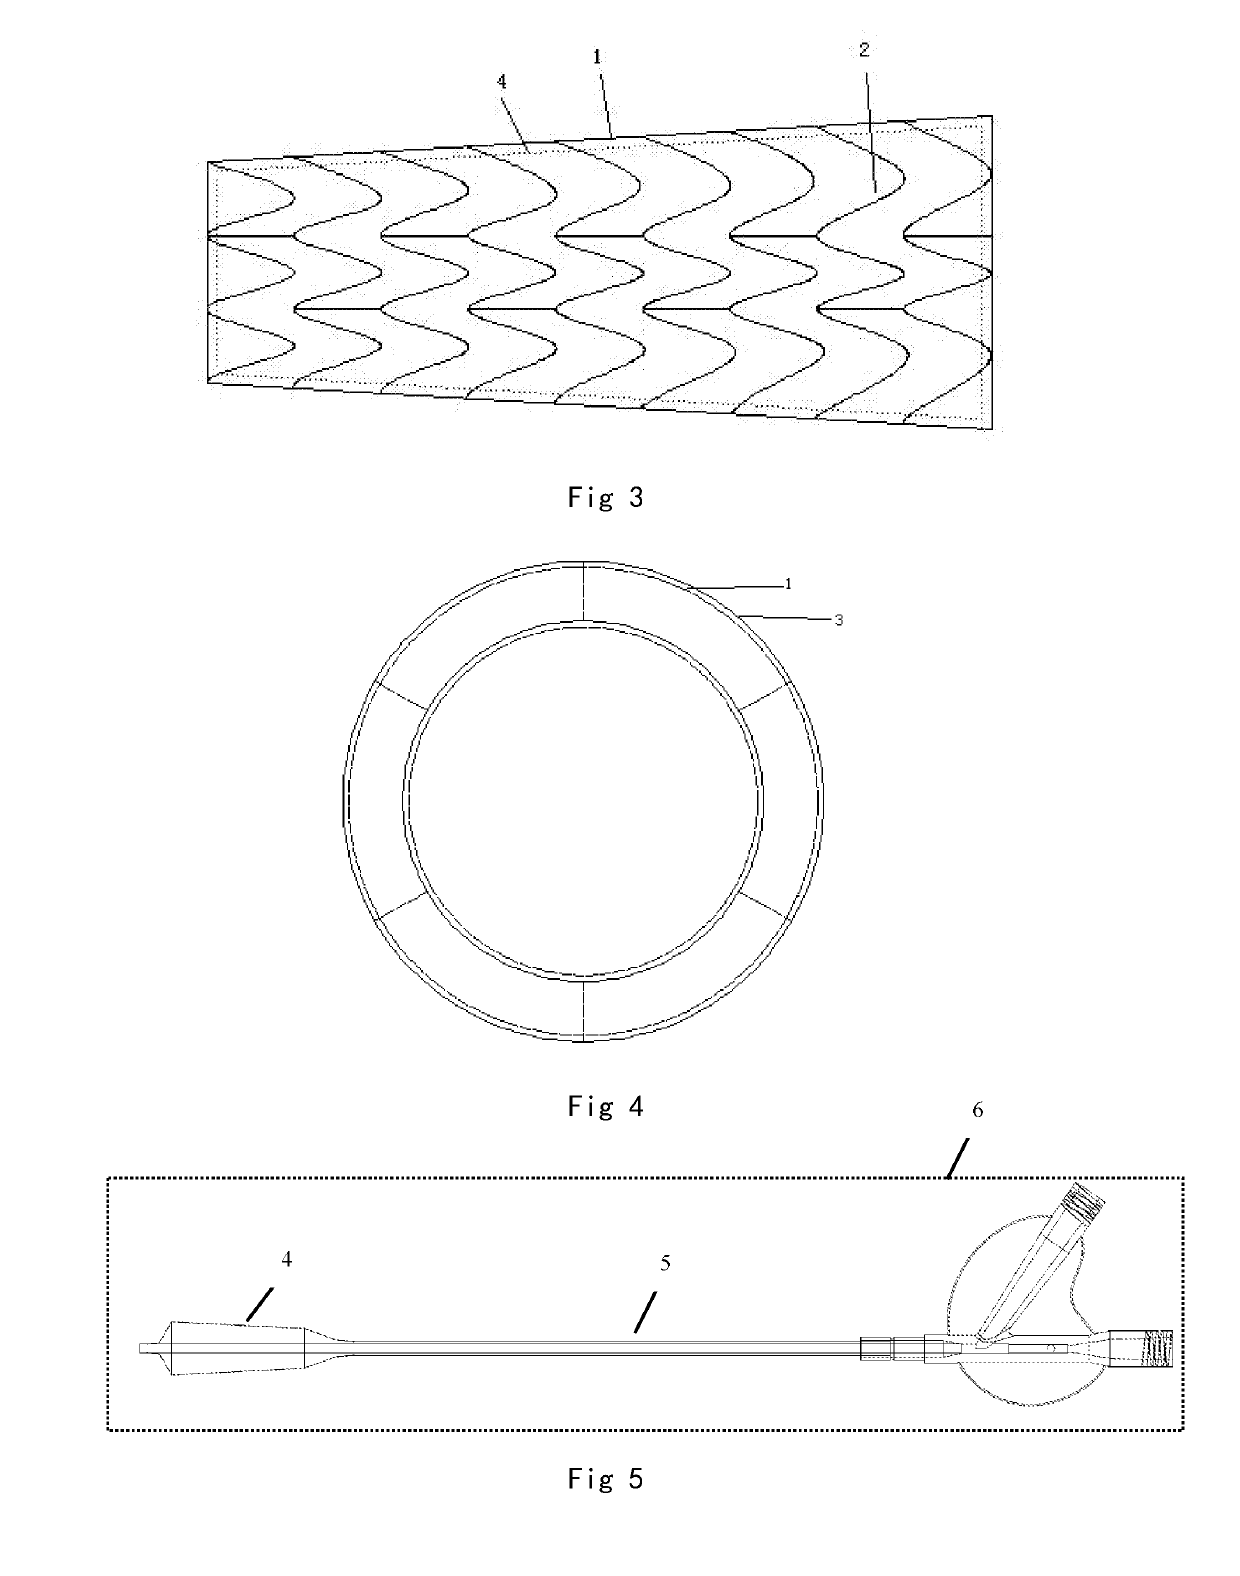 Balloon expandable, bioabsorbable, drug-coated sinus stent